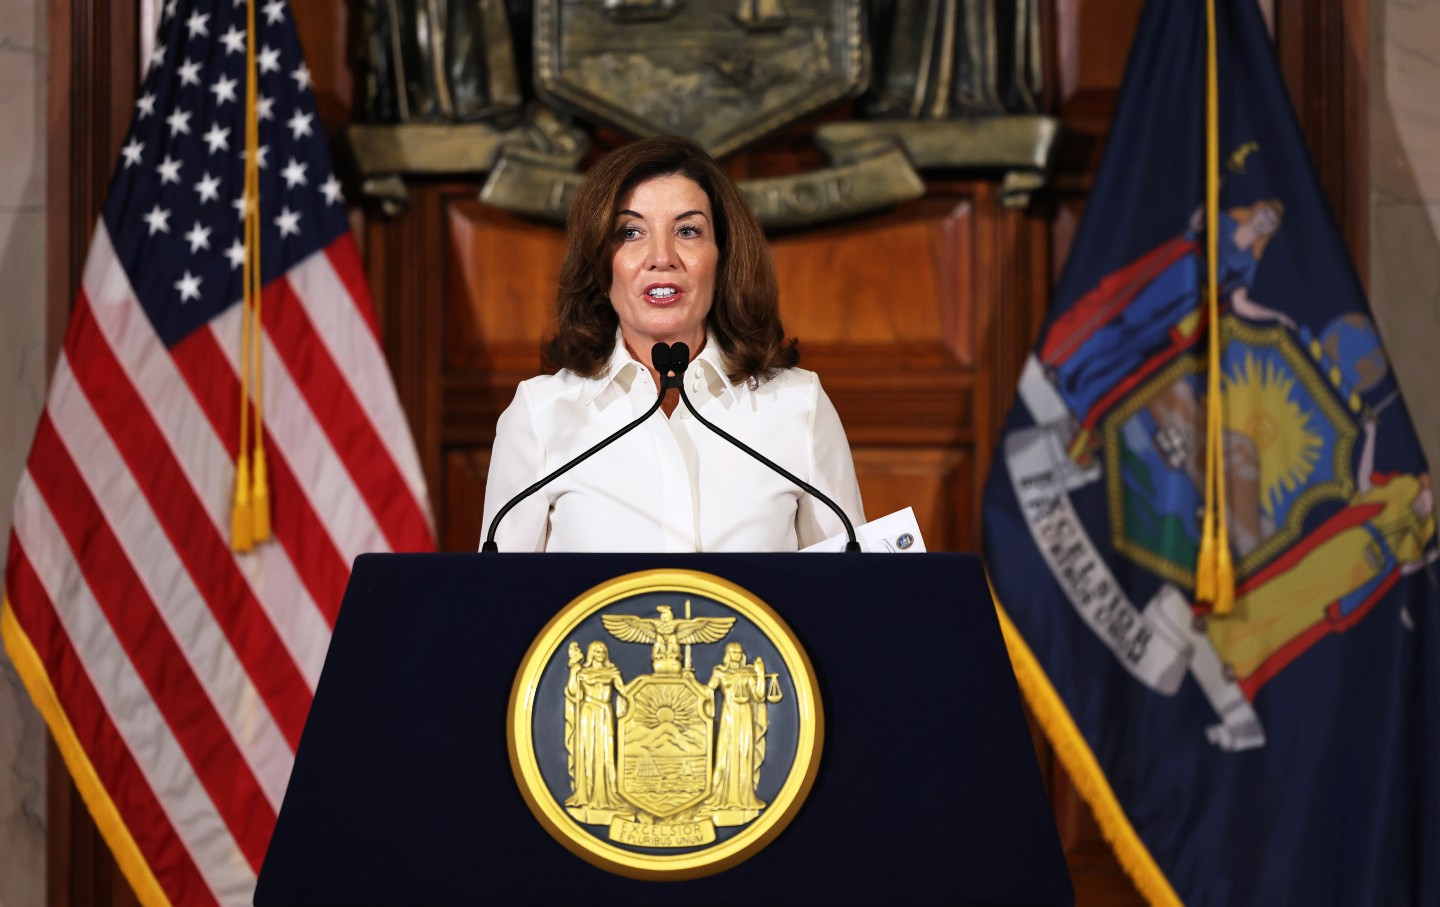 Kathy Hochul Is About to Break Ranks With Progressives